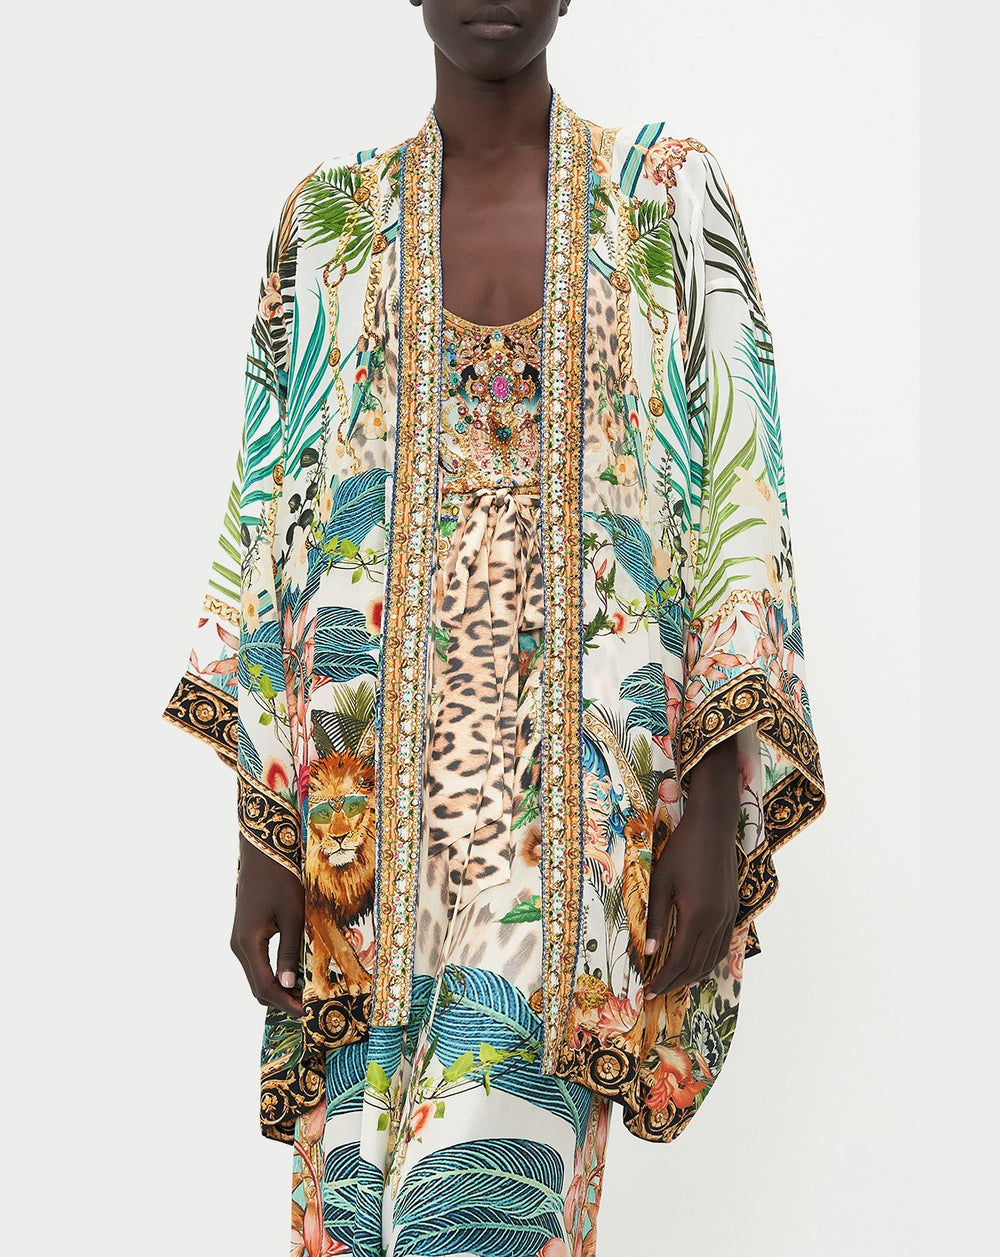 Camilla Short Layer with Neckband, Royalty Loyalty Silk Floral Robe